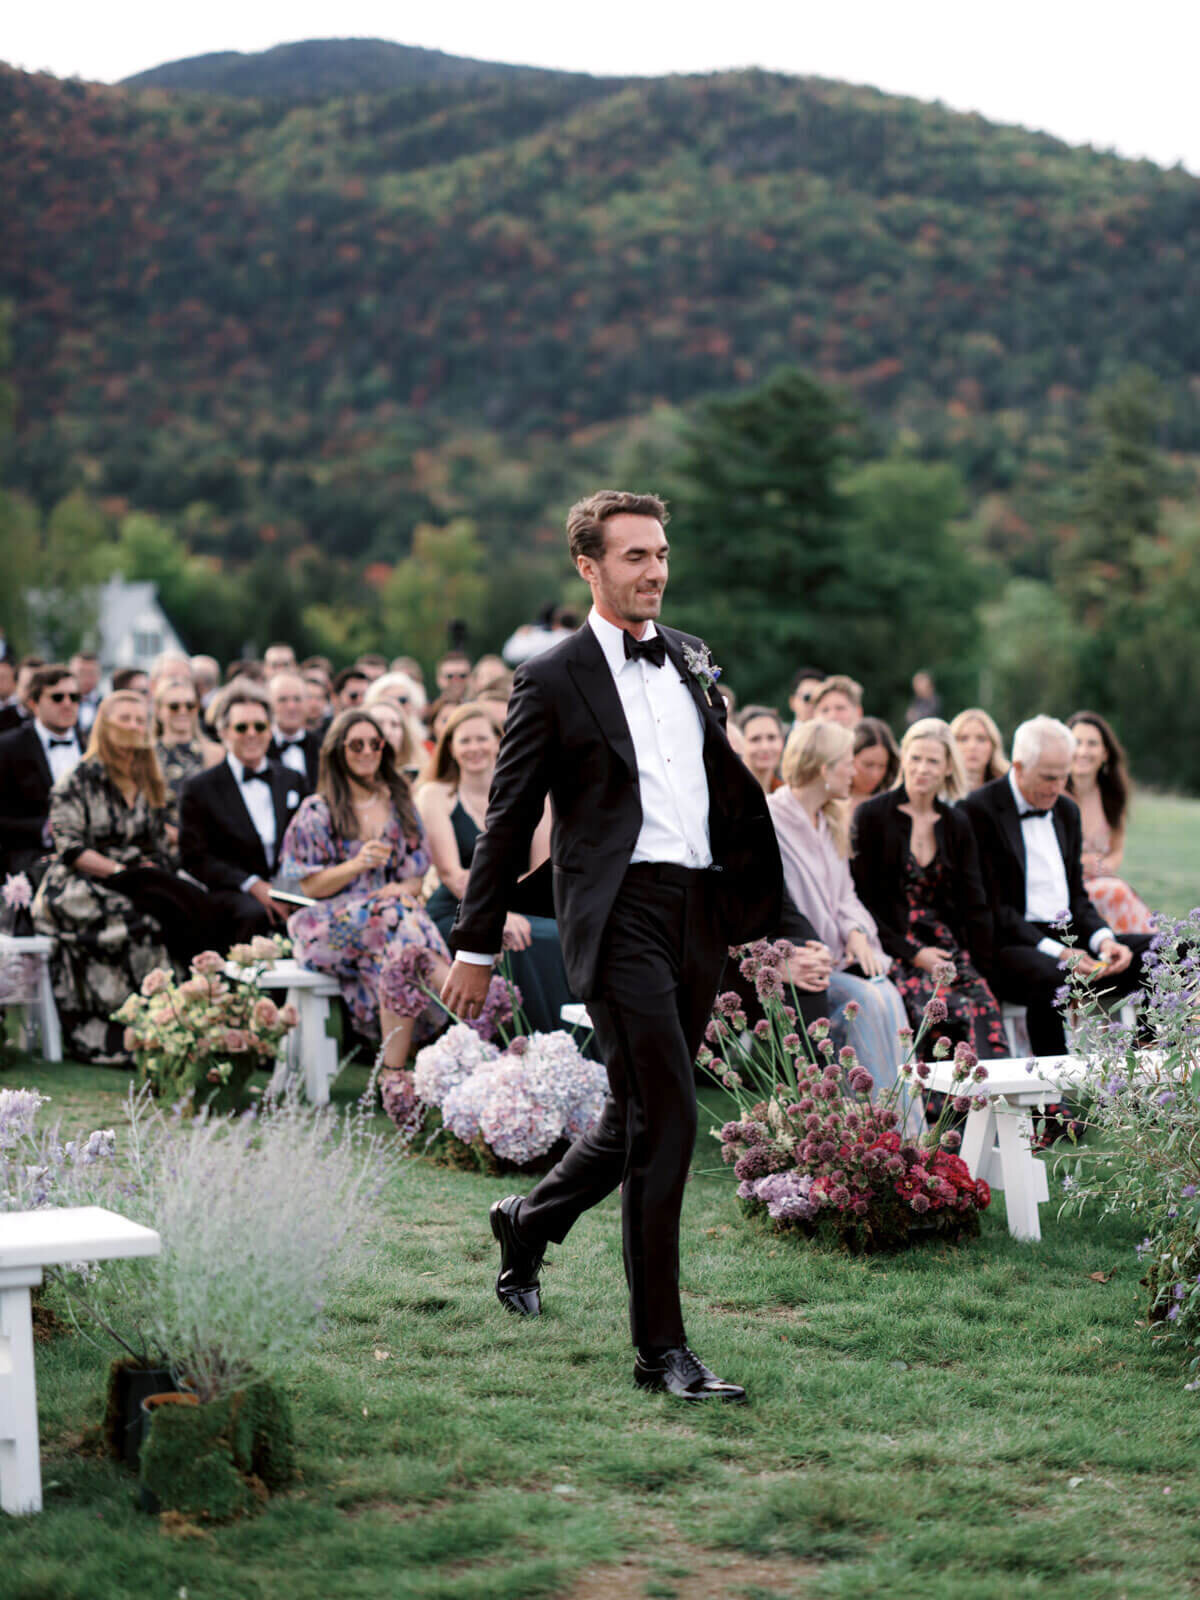 The groom is walking on the wedding aisle outdoors, as the guests watched, at The Ausable Club, NY. Image by Jenny Fu Studio.